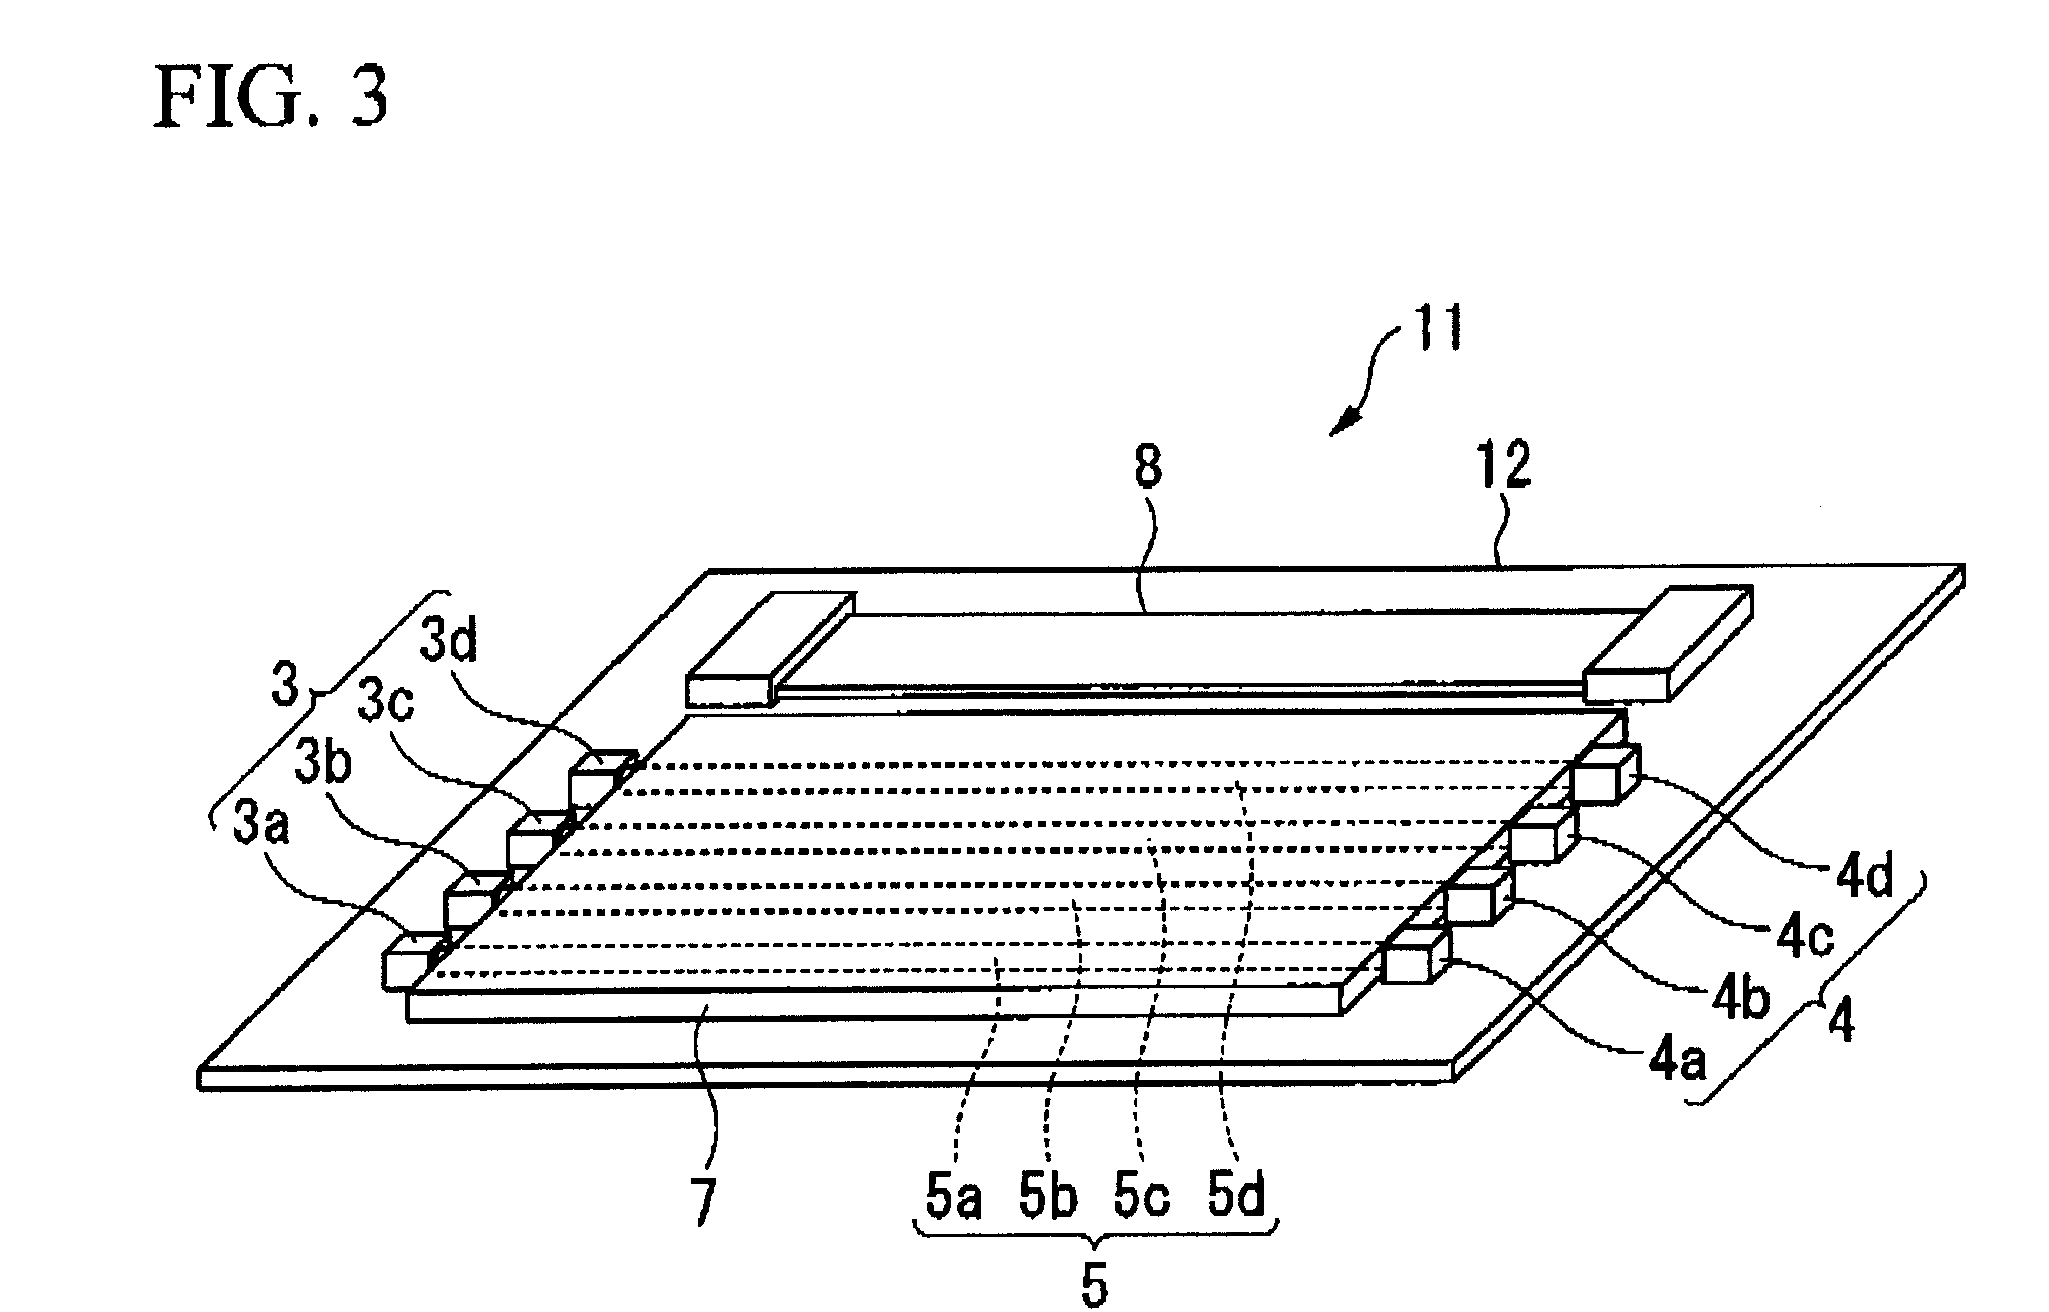 Optical/electrical circuit interconnect board and evaluation method therefor